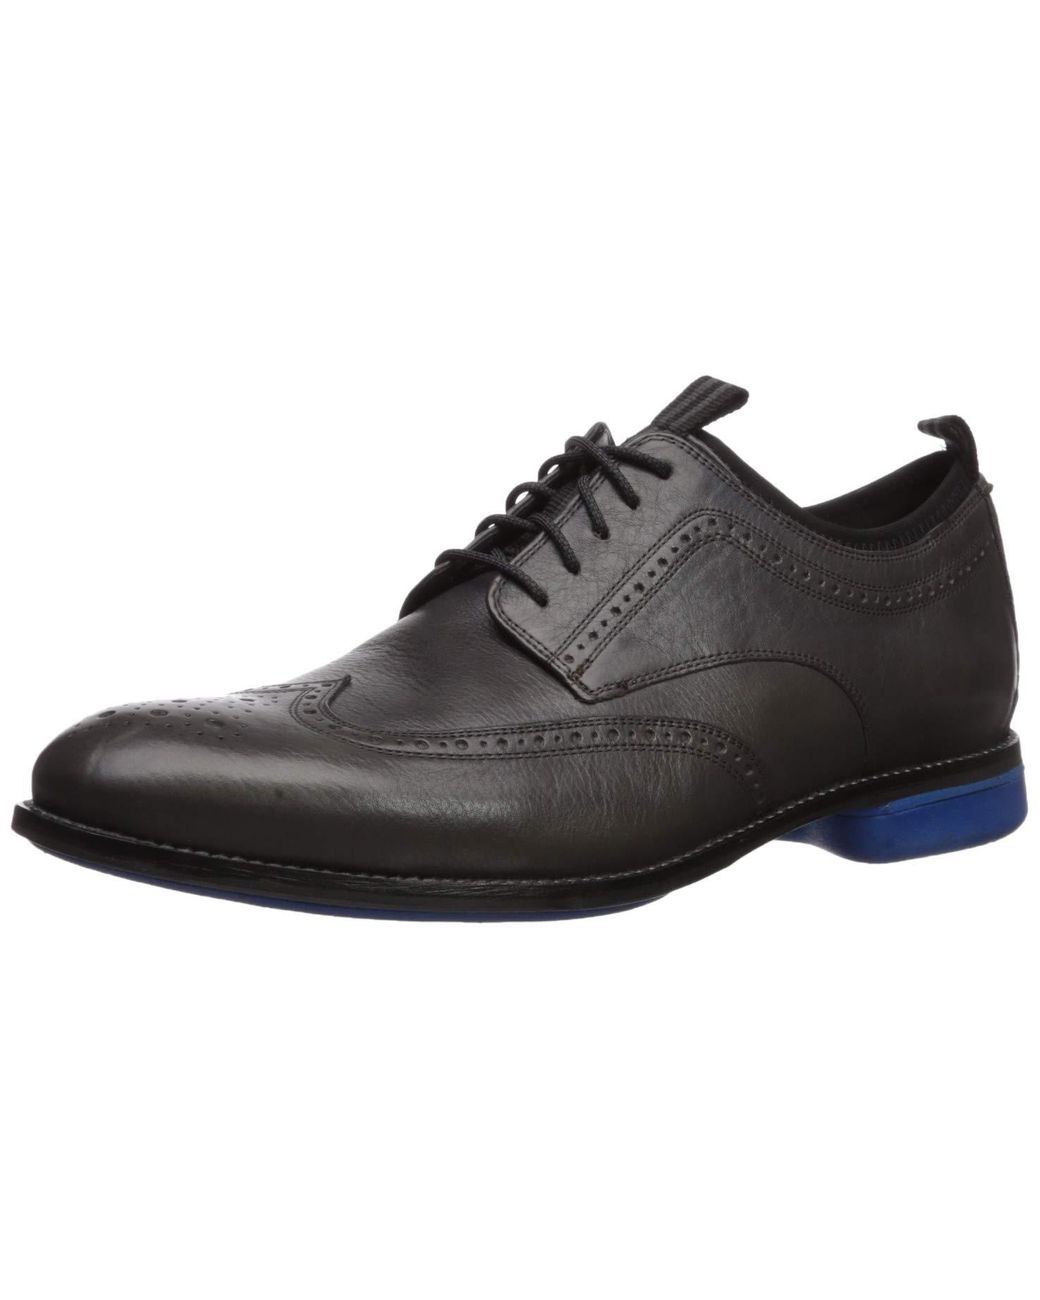 holland long wing oxford